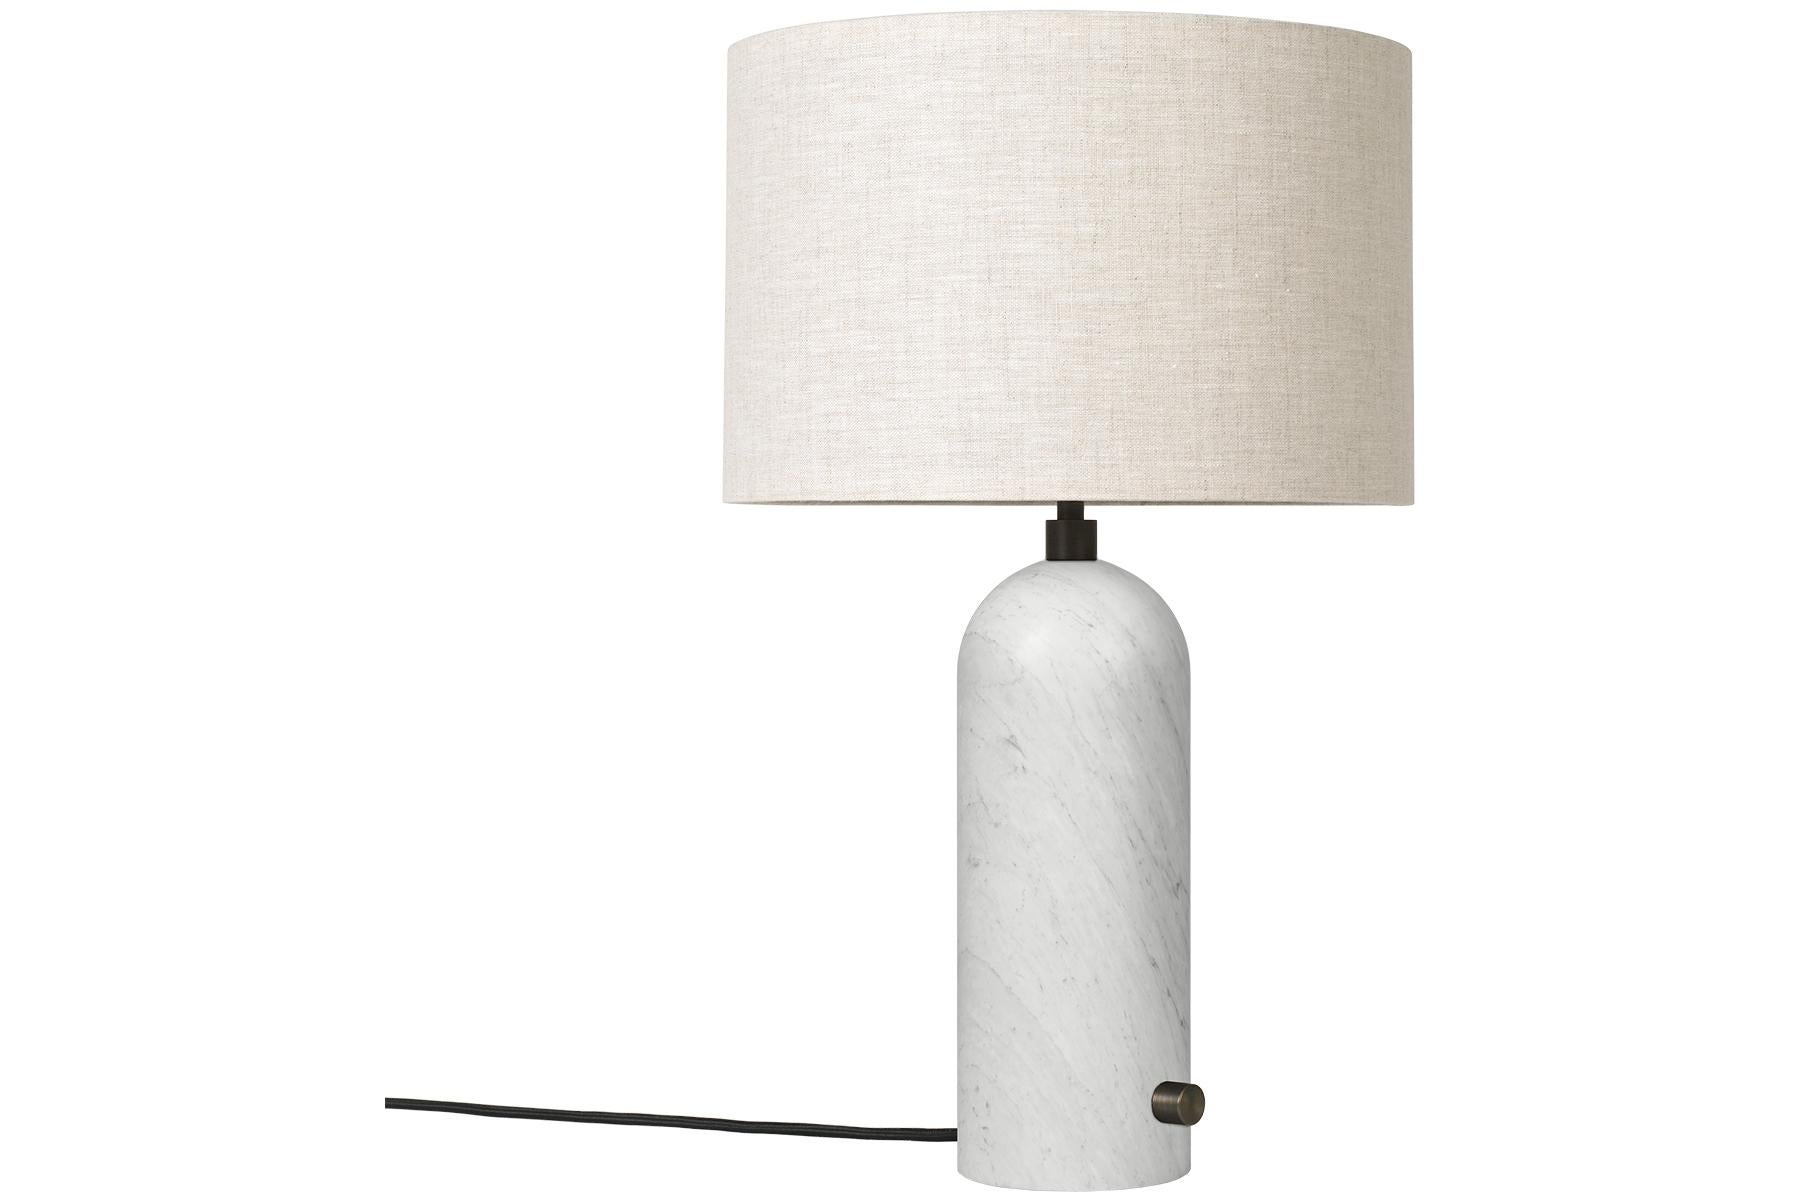 Gravity Table Lamp - Small, Grey Marble, White. For Sale 8